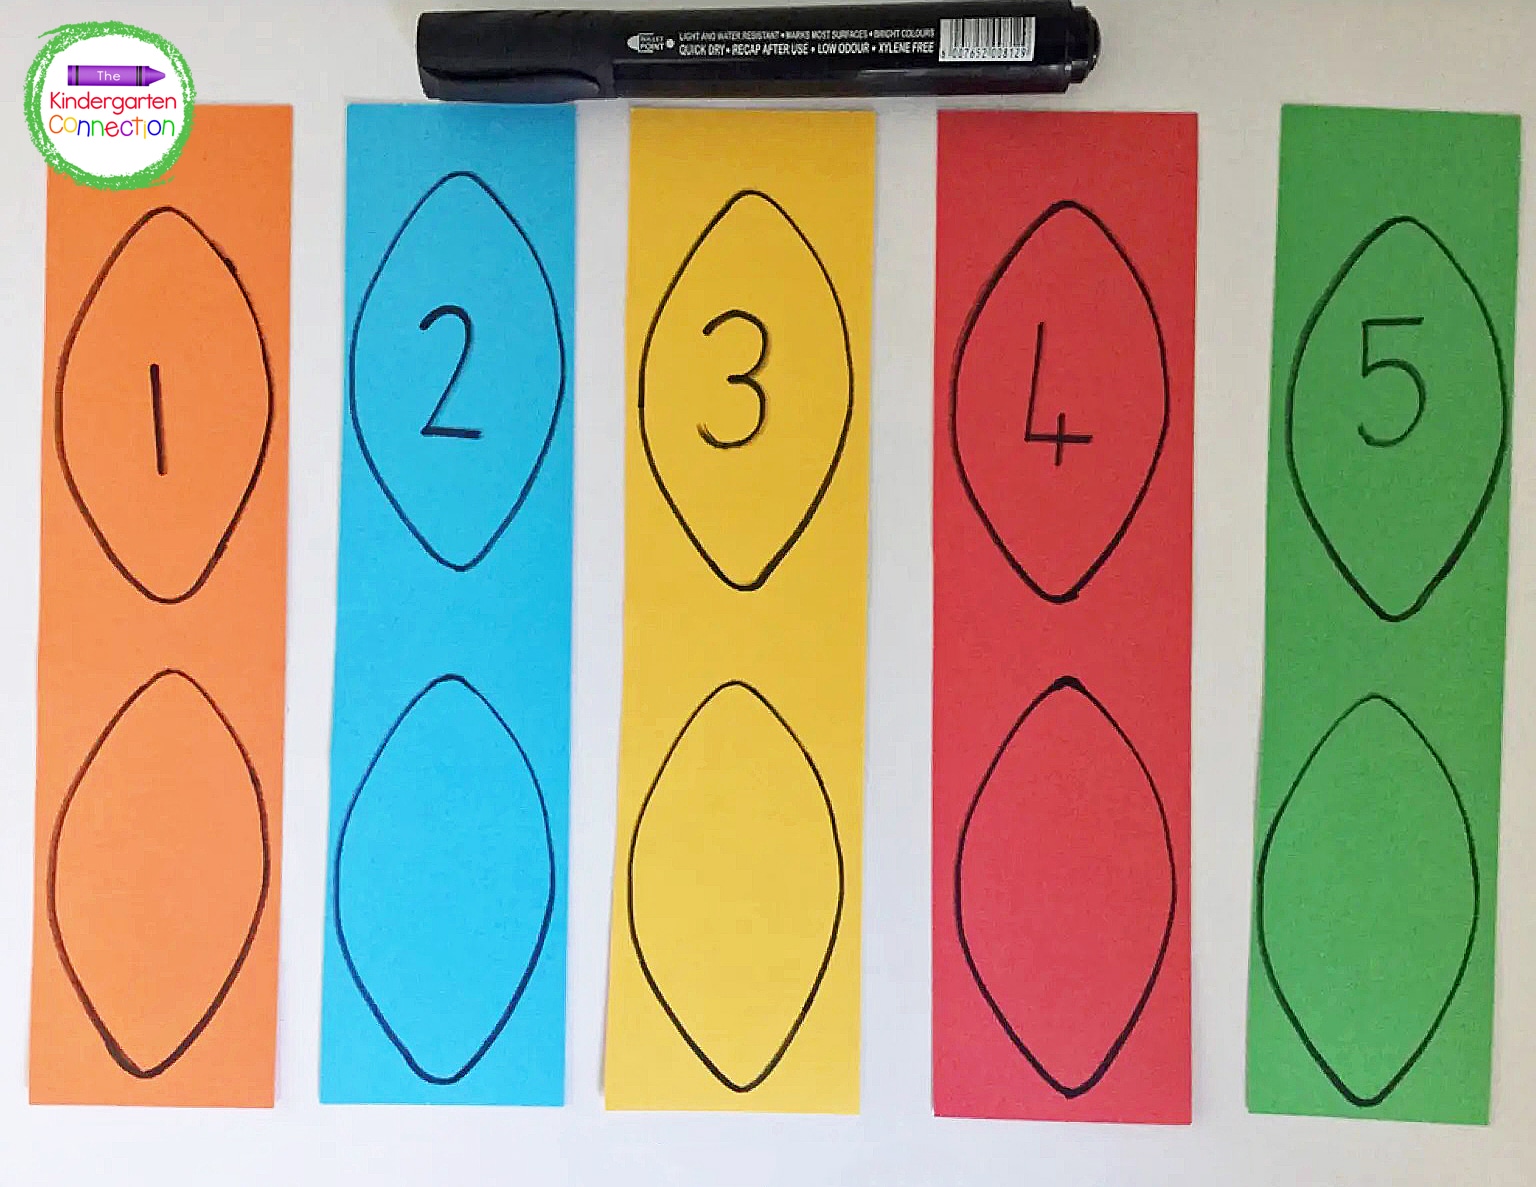 Draw light bulb shapes on the cardstock. Cut it out and mark it with numbers 1 to 10.